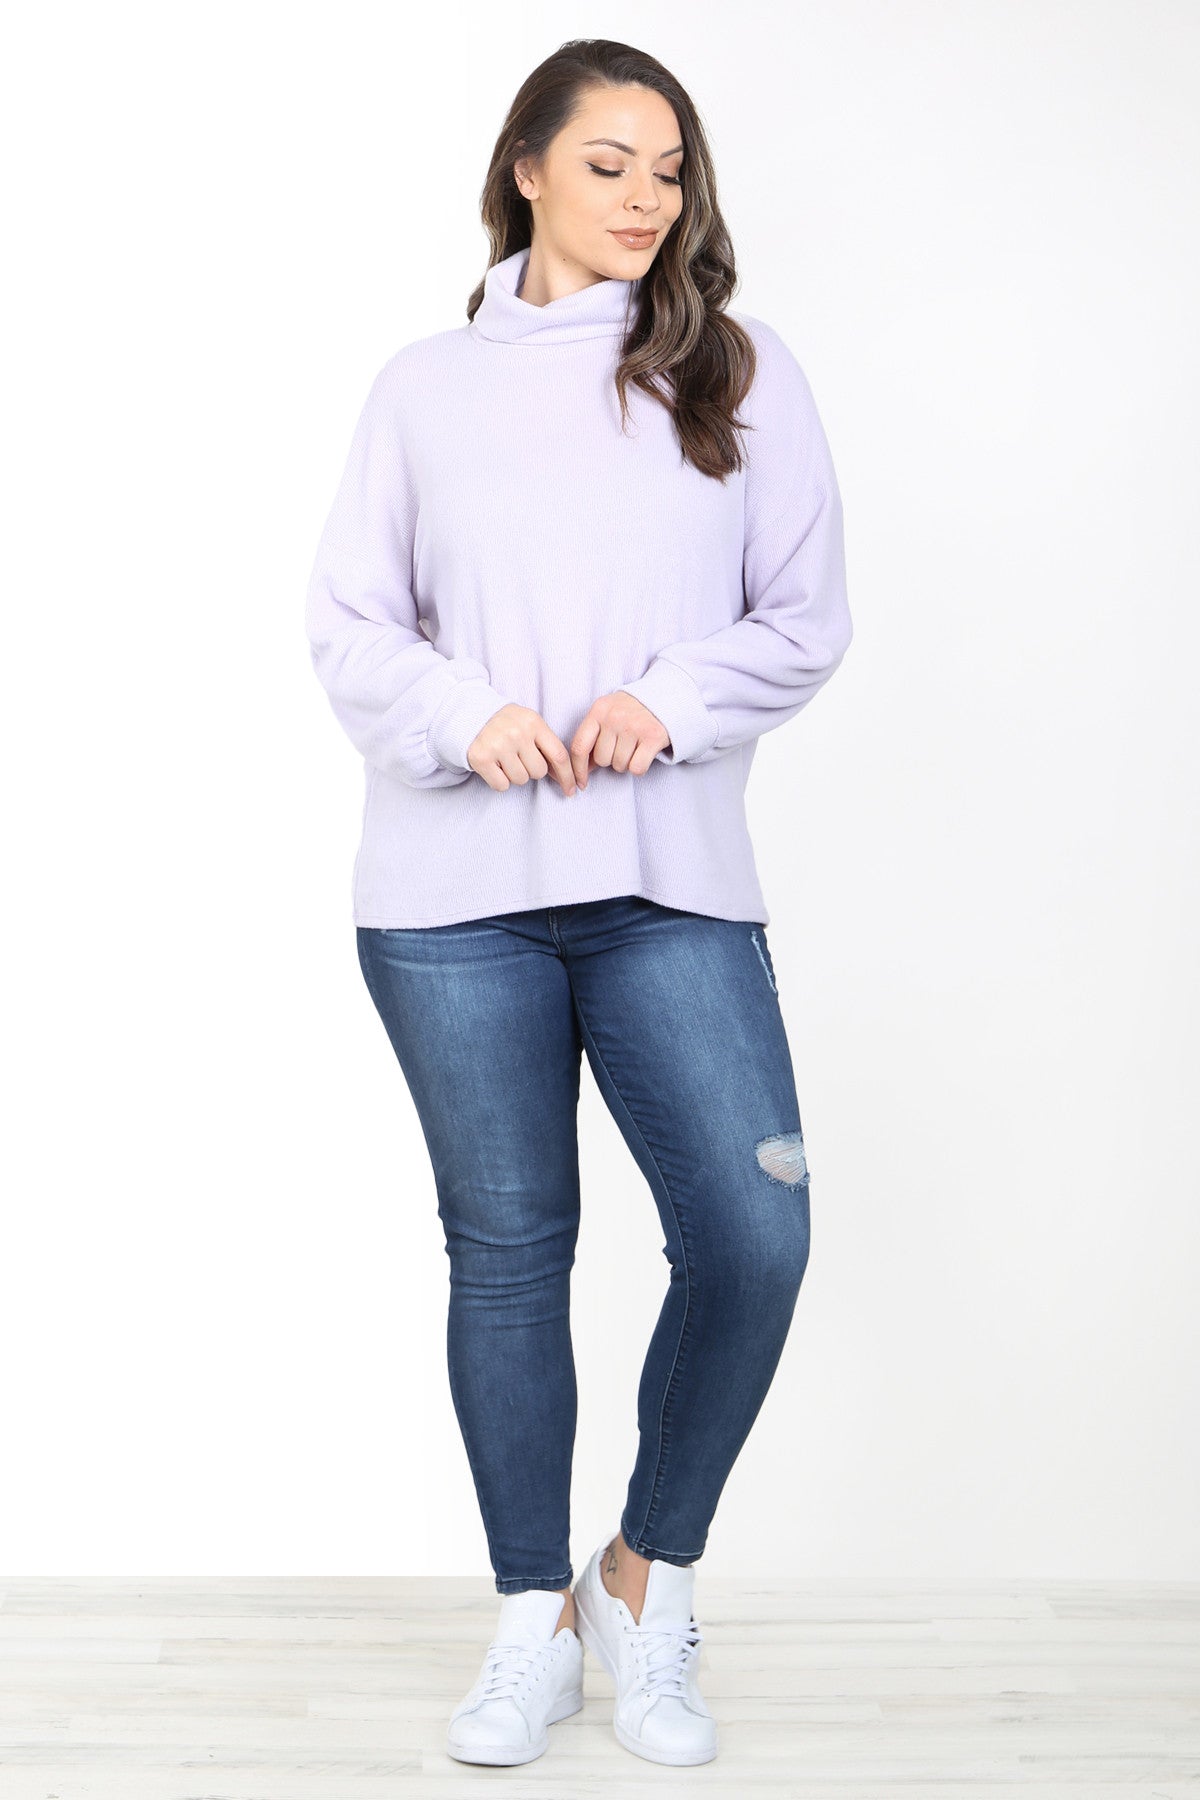 LAVENDER COWL TURTLE NECK BACK V-NECK CUT CUFFED LONG SLEEVE PLUS SIZE TOP